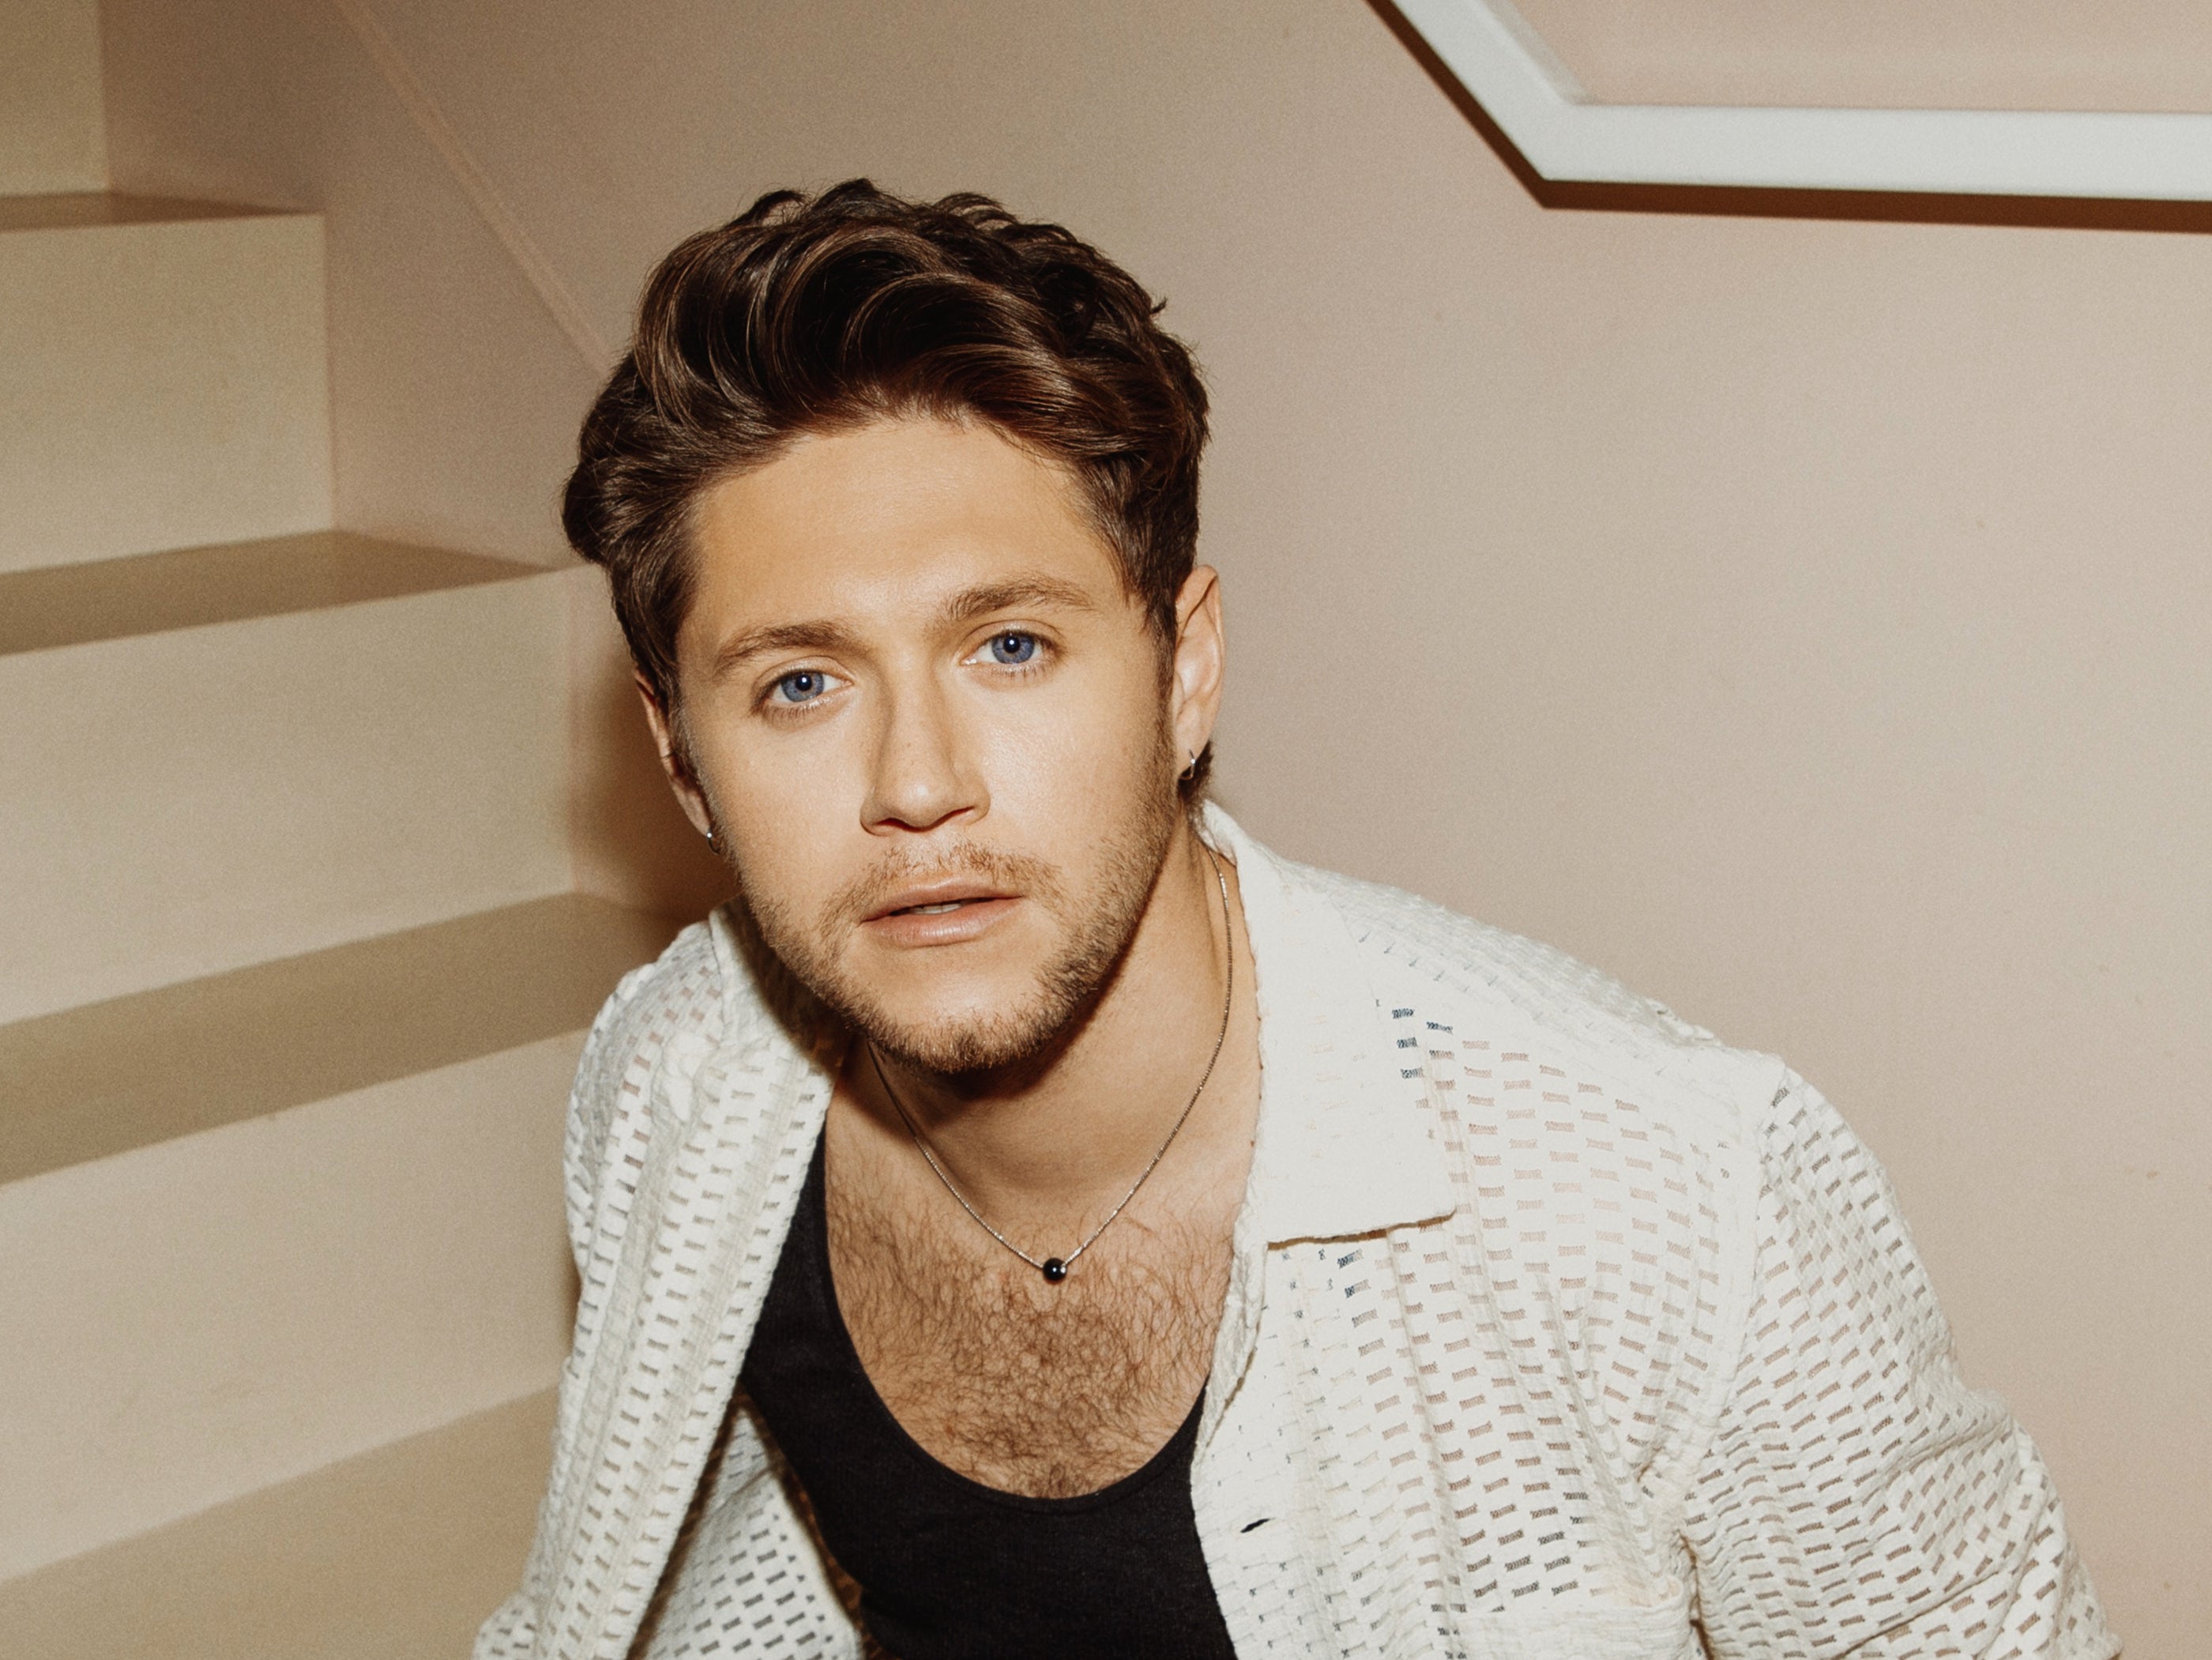 Niall Horan The Show Album Review And Hak Baker World’s End Fm The Independent